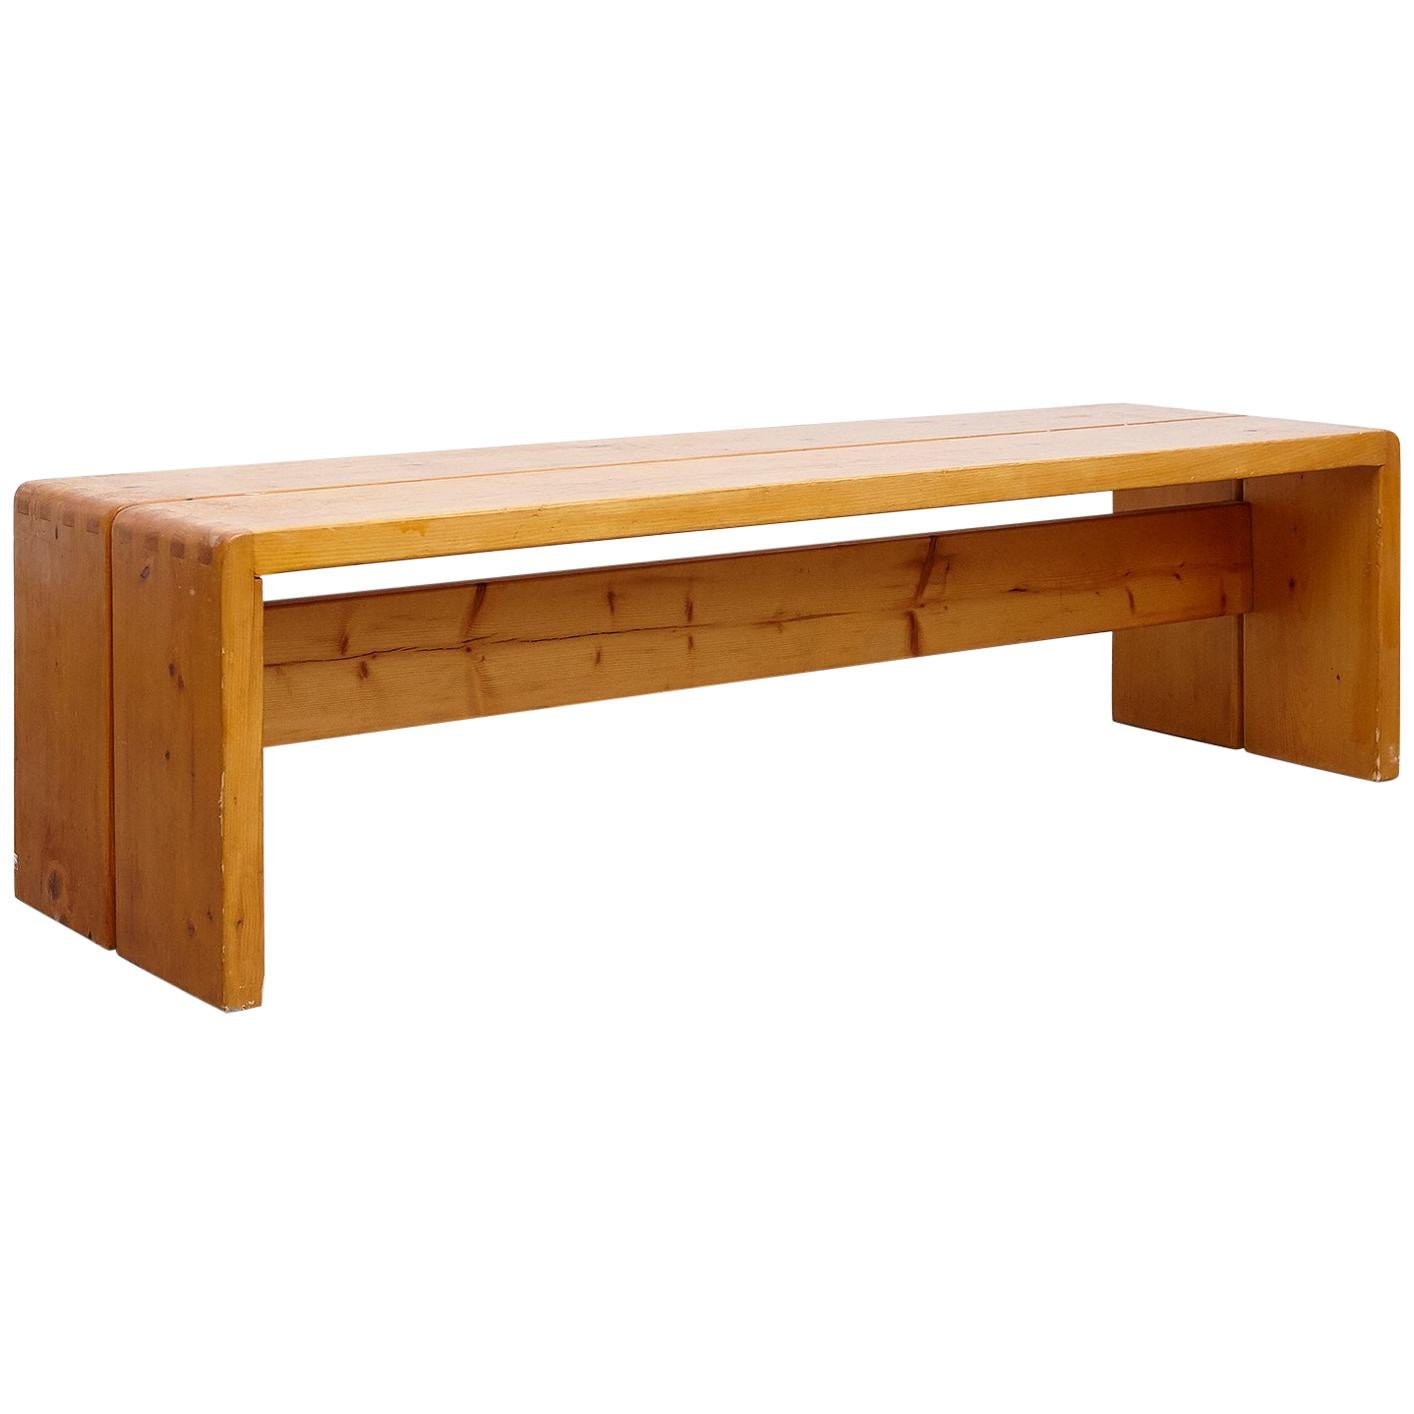 Charlotte Perriand, Mid Century Modern Large Wood Bench for Les Arcs, circa 1960